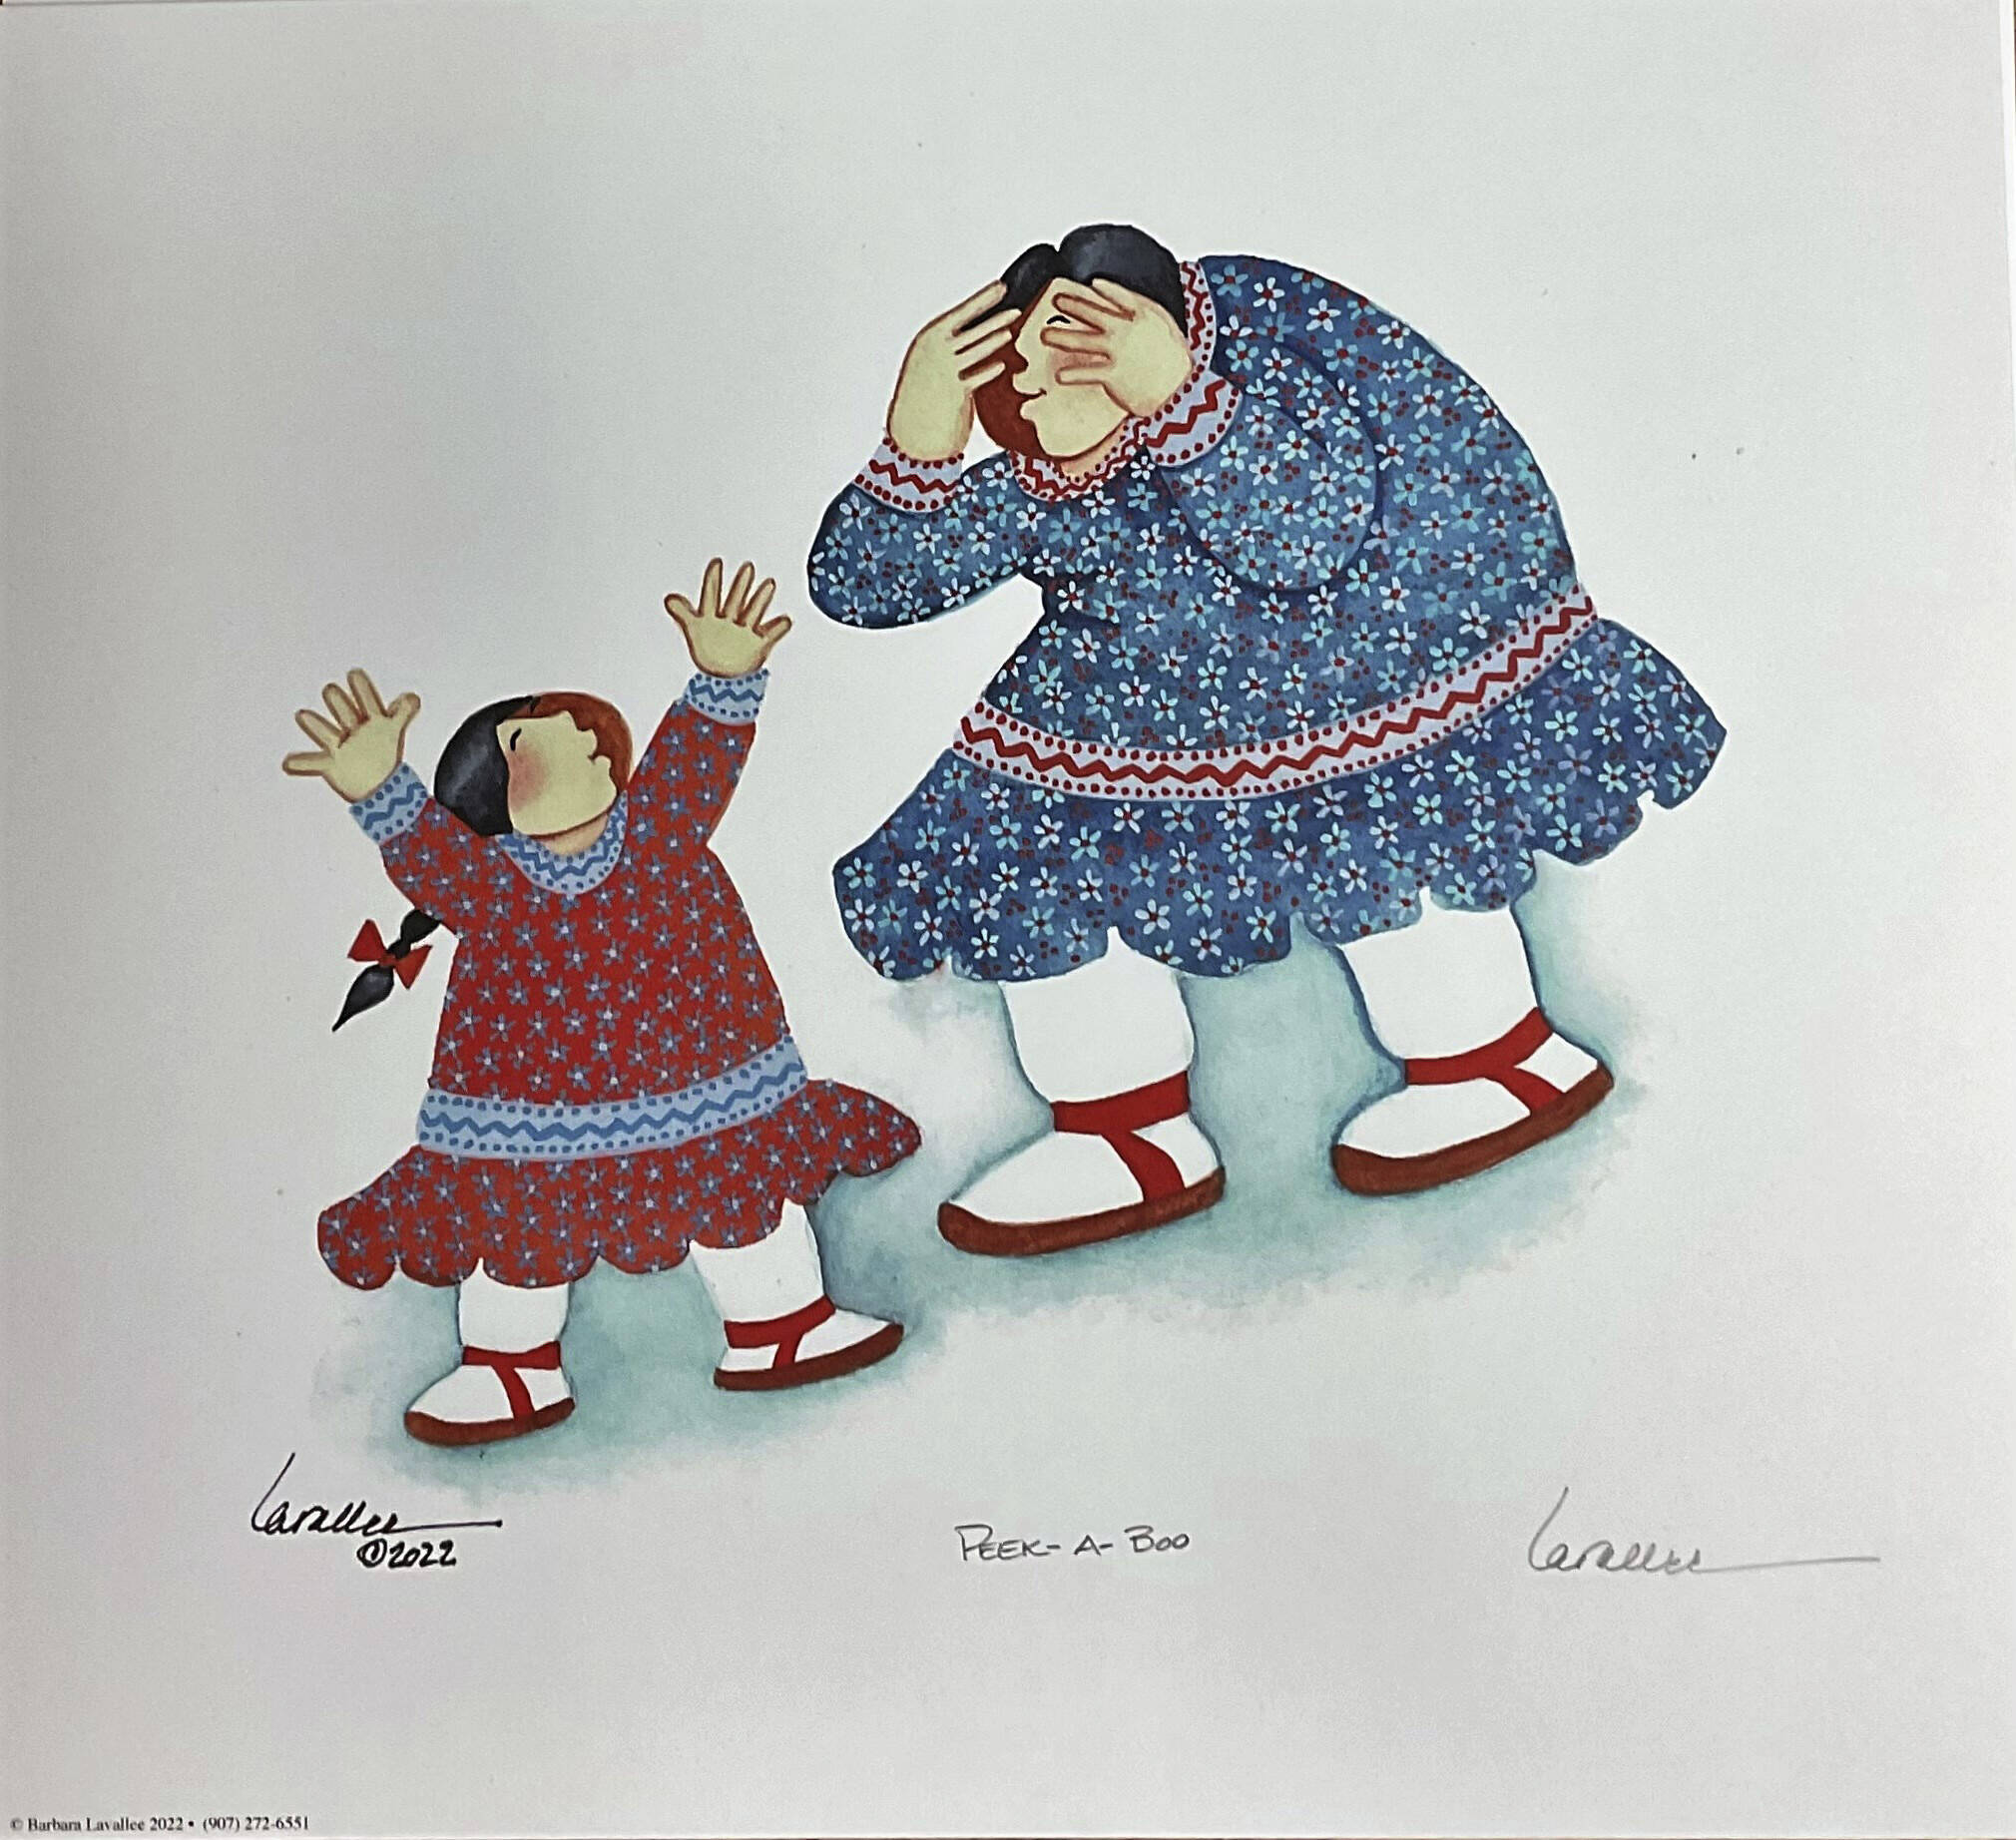 “Peek-a-boo,” a print by Barbara Lavallee, is on display at the Art Shop Gallery through December. (Photo provided)